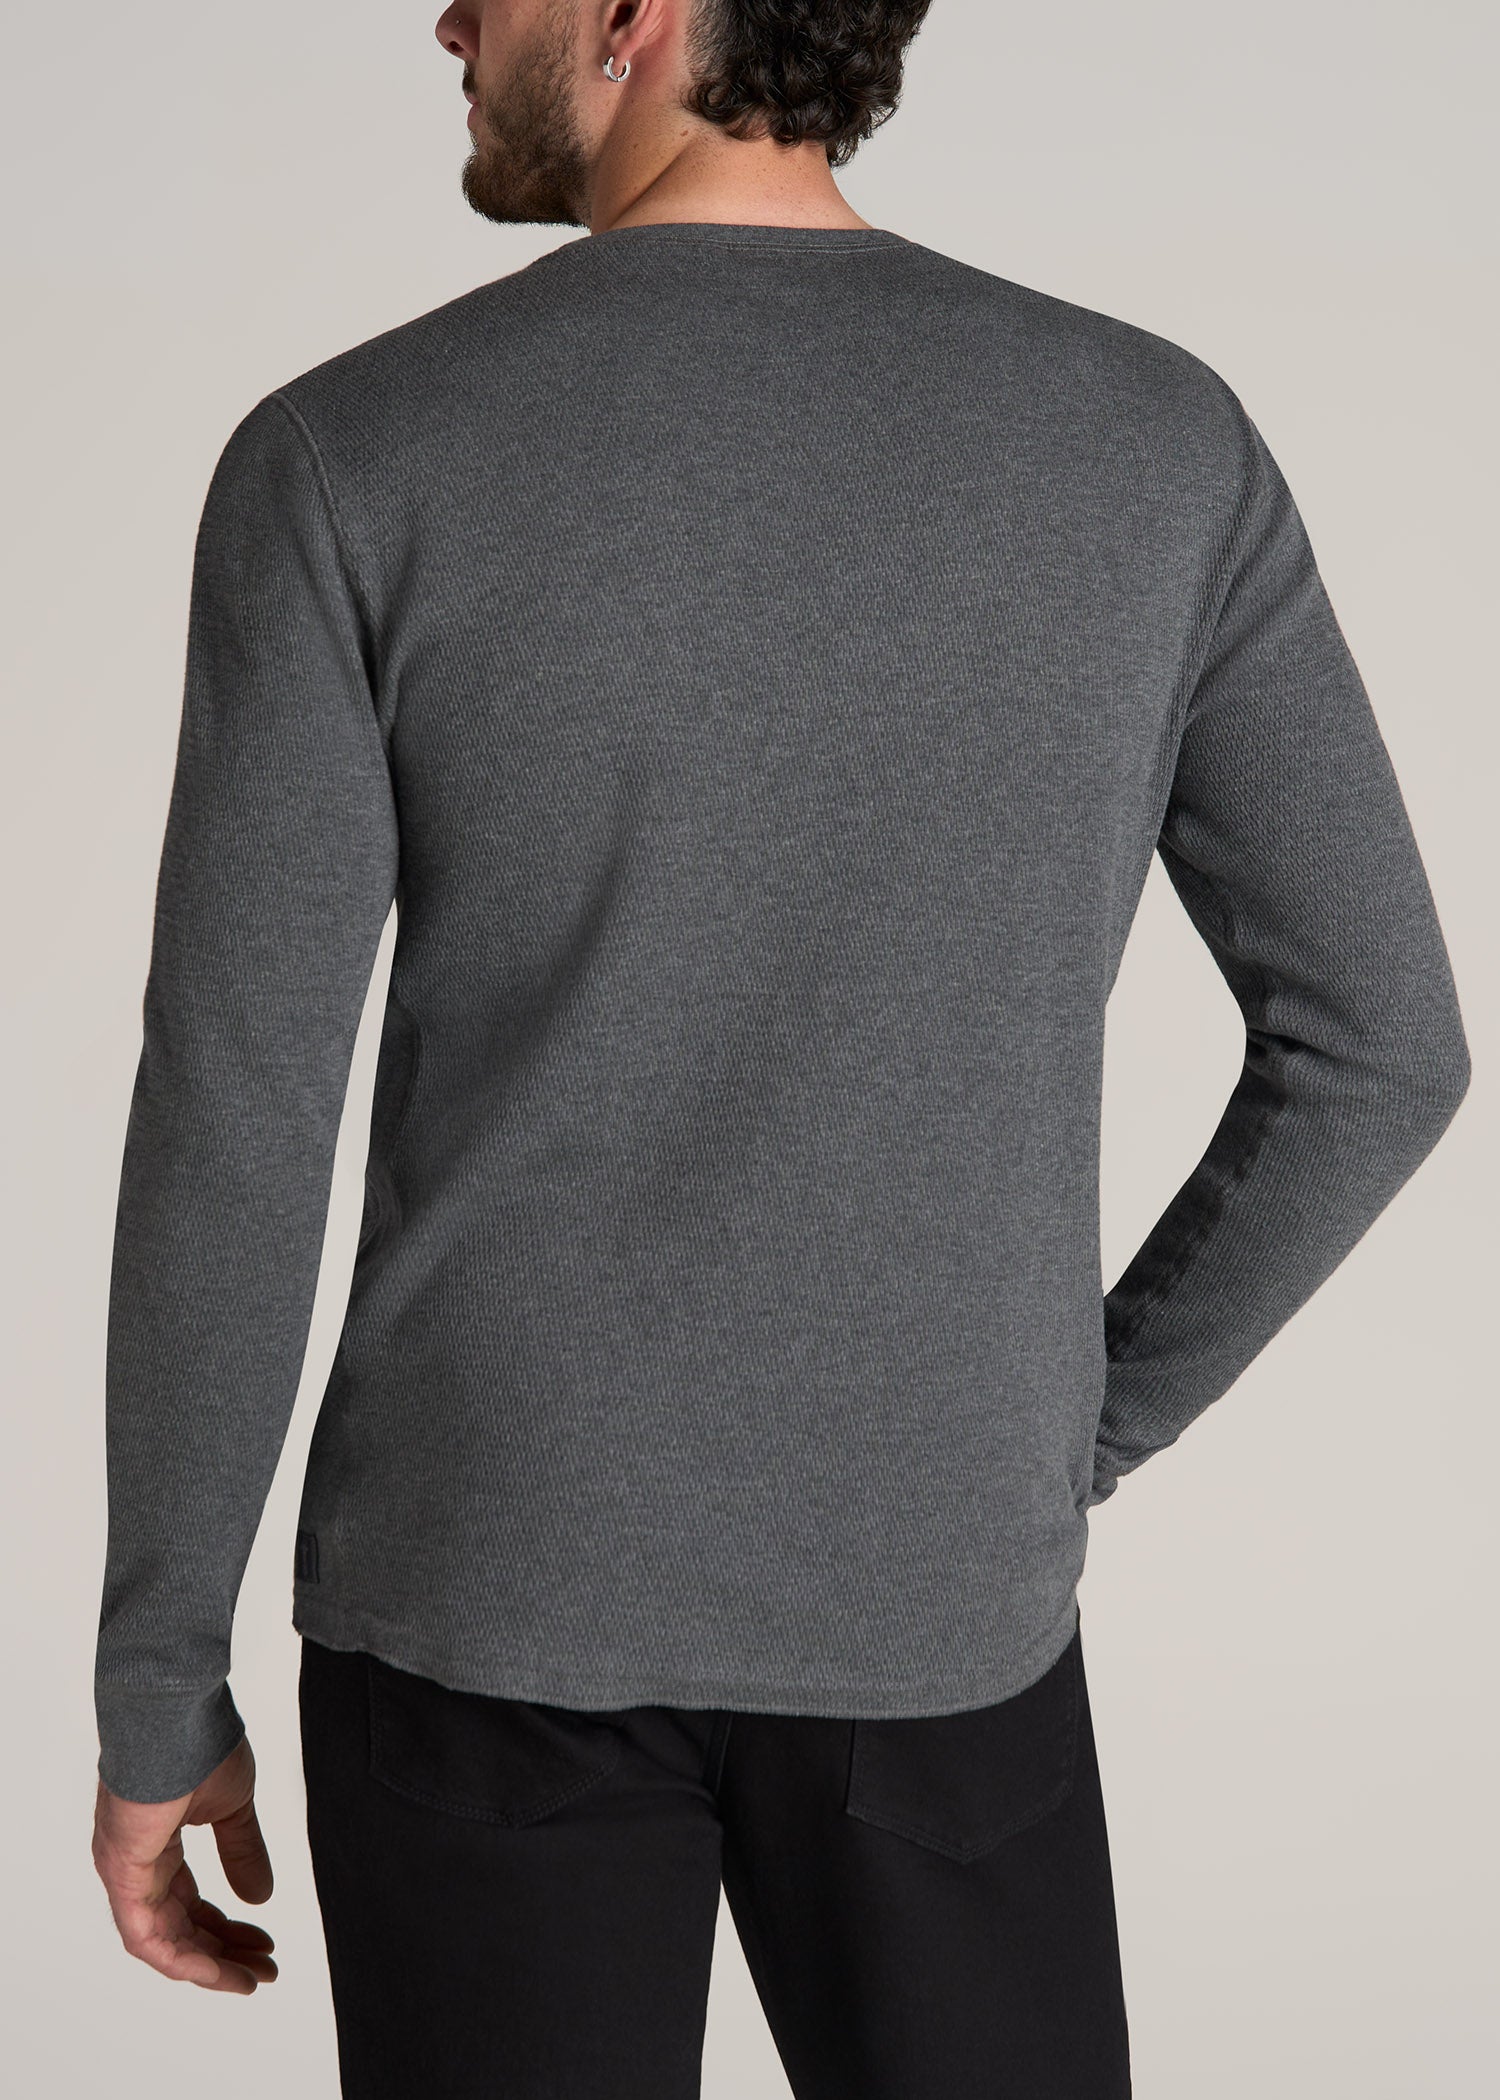 Double Honeycomb Thermal Crewneck Extra-Long Top in Charcoal Mix